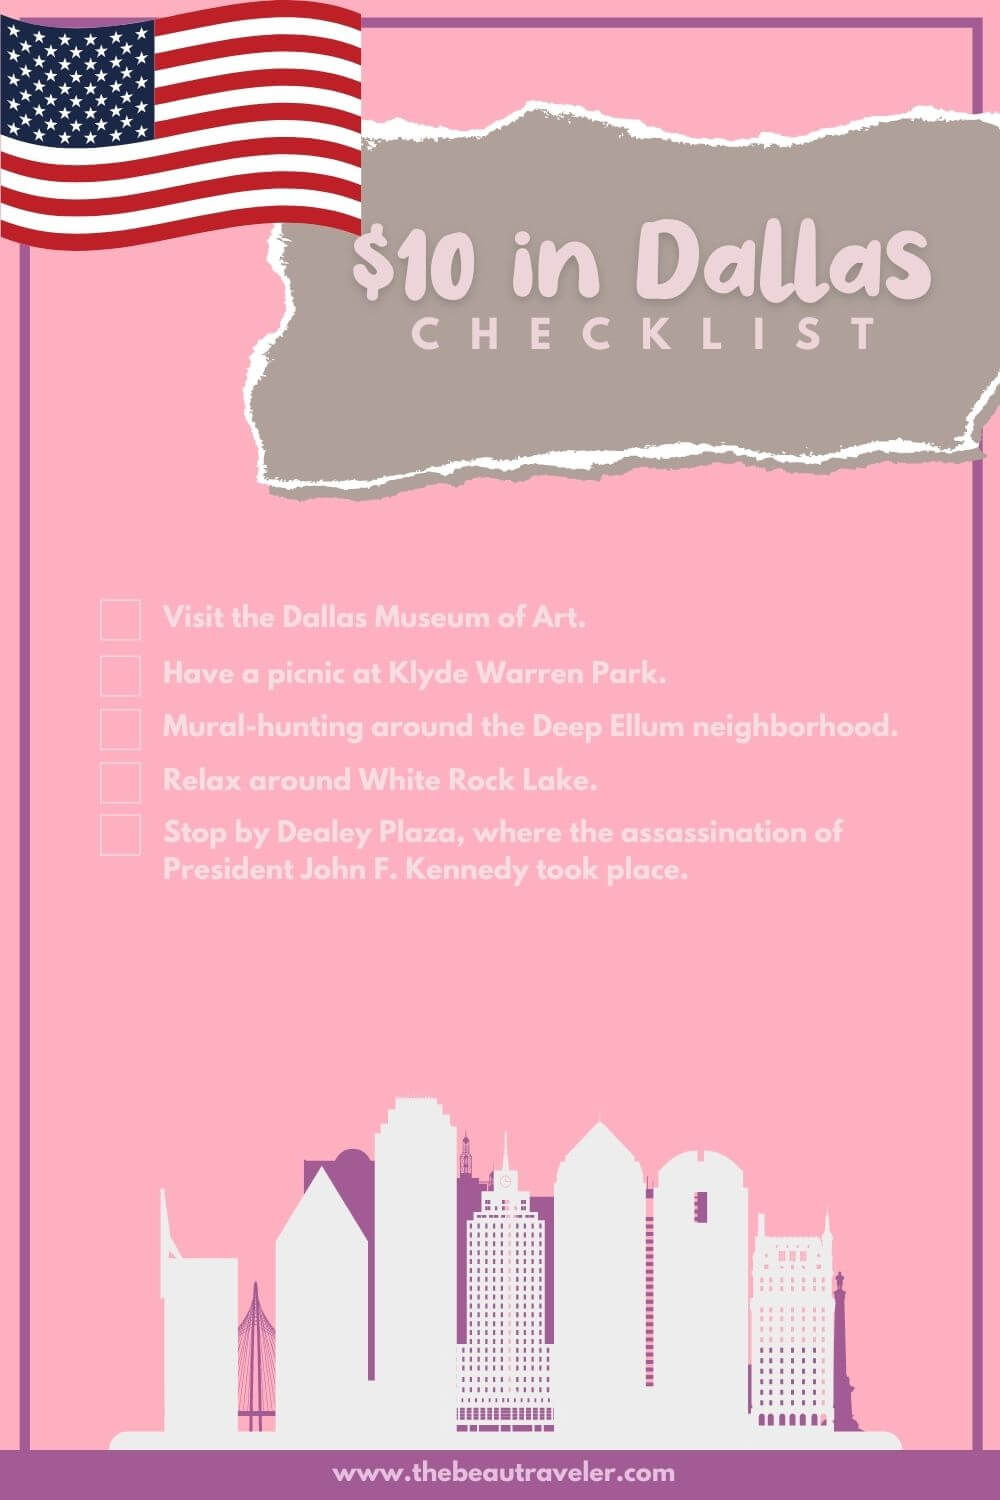 What You Could Get in Dallas for $10 - The BeauTraveler